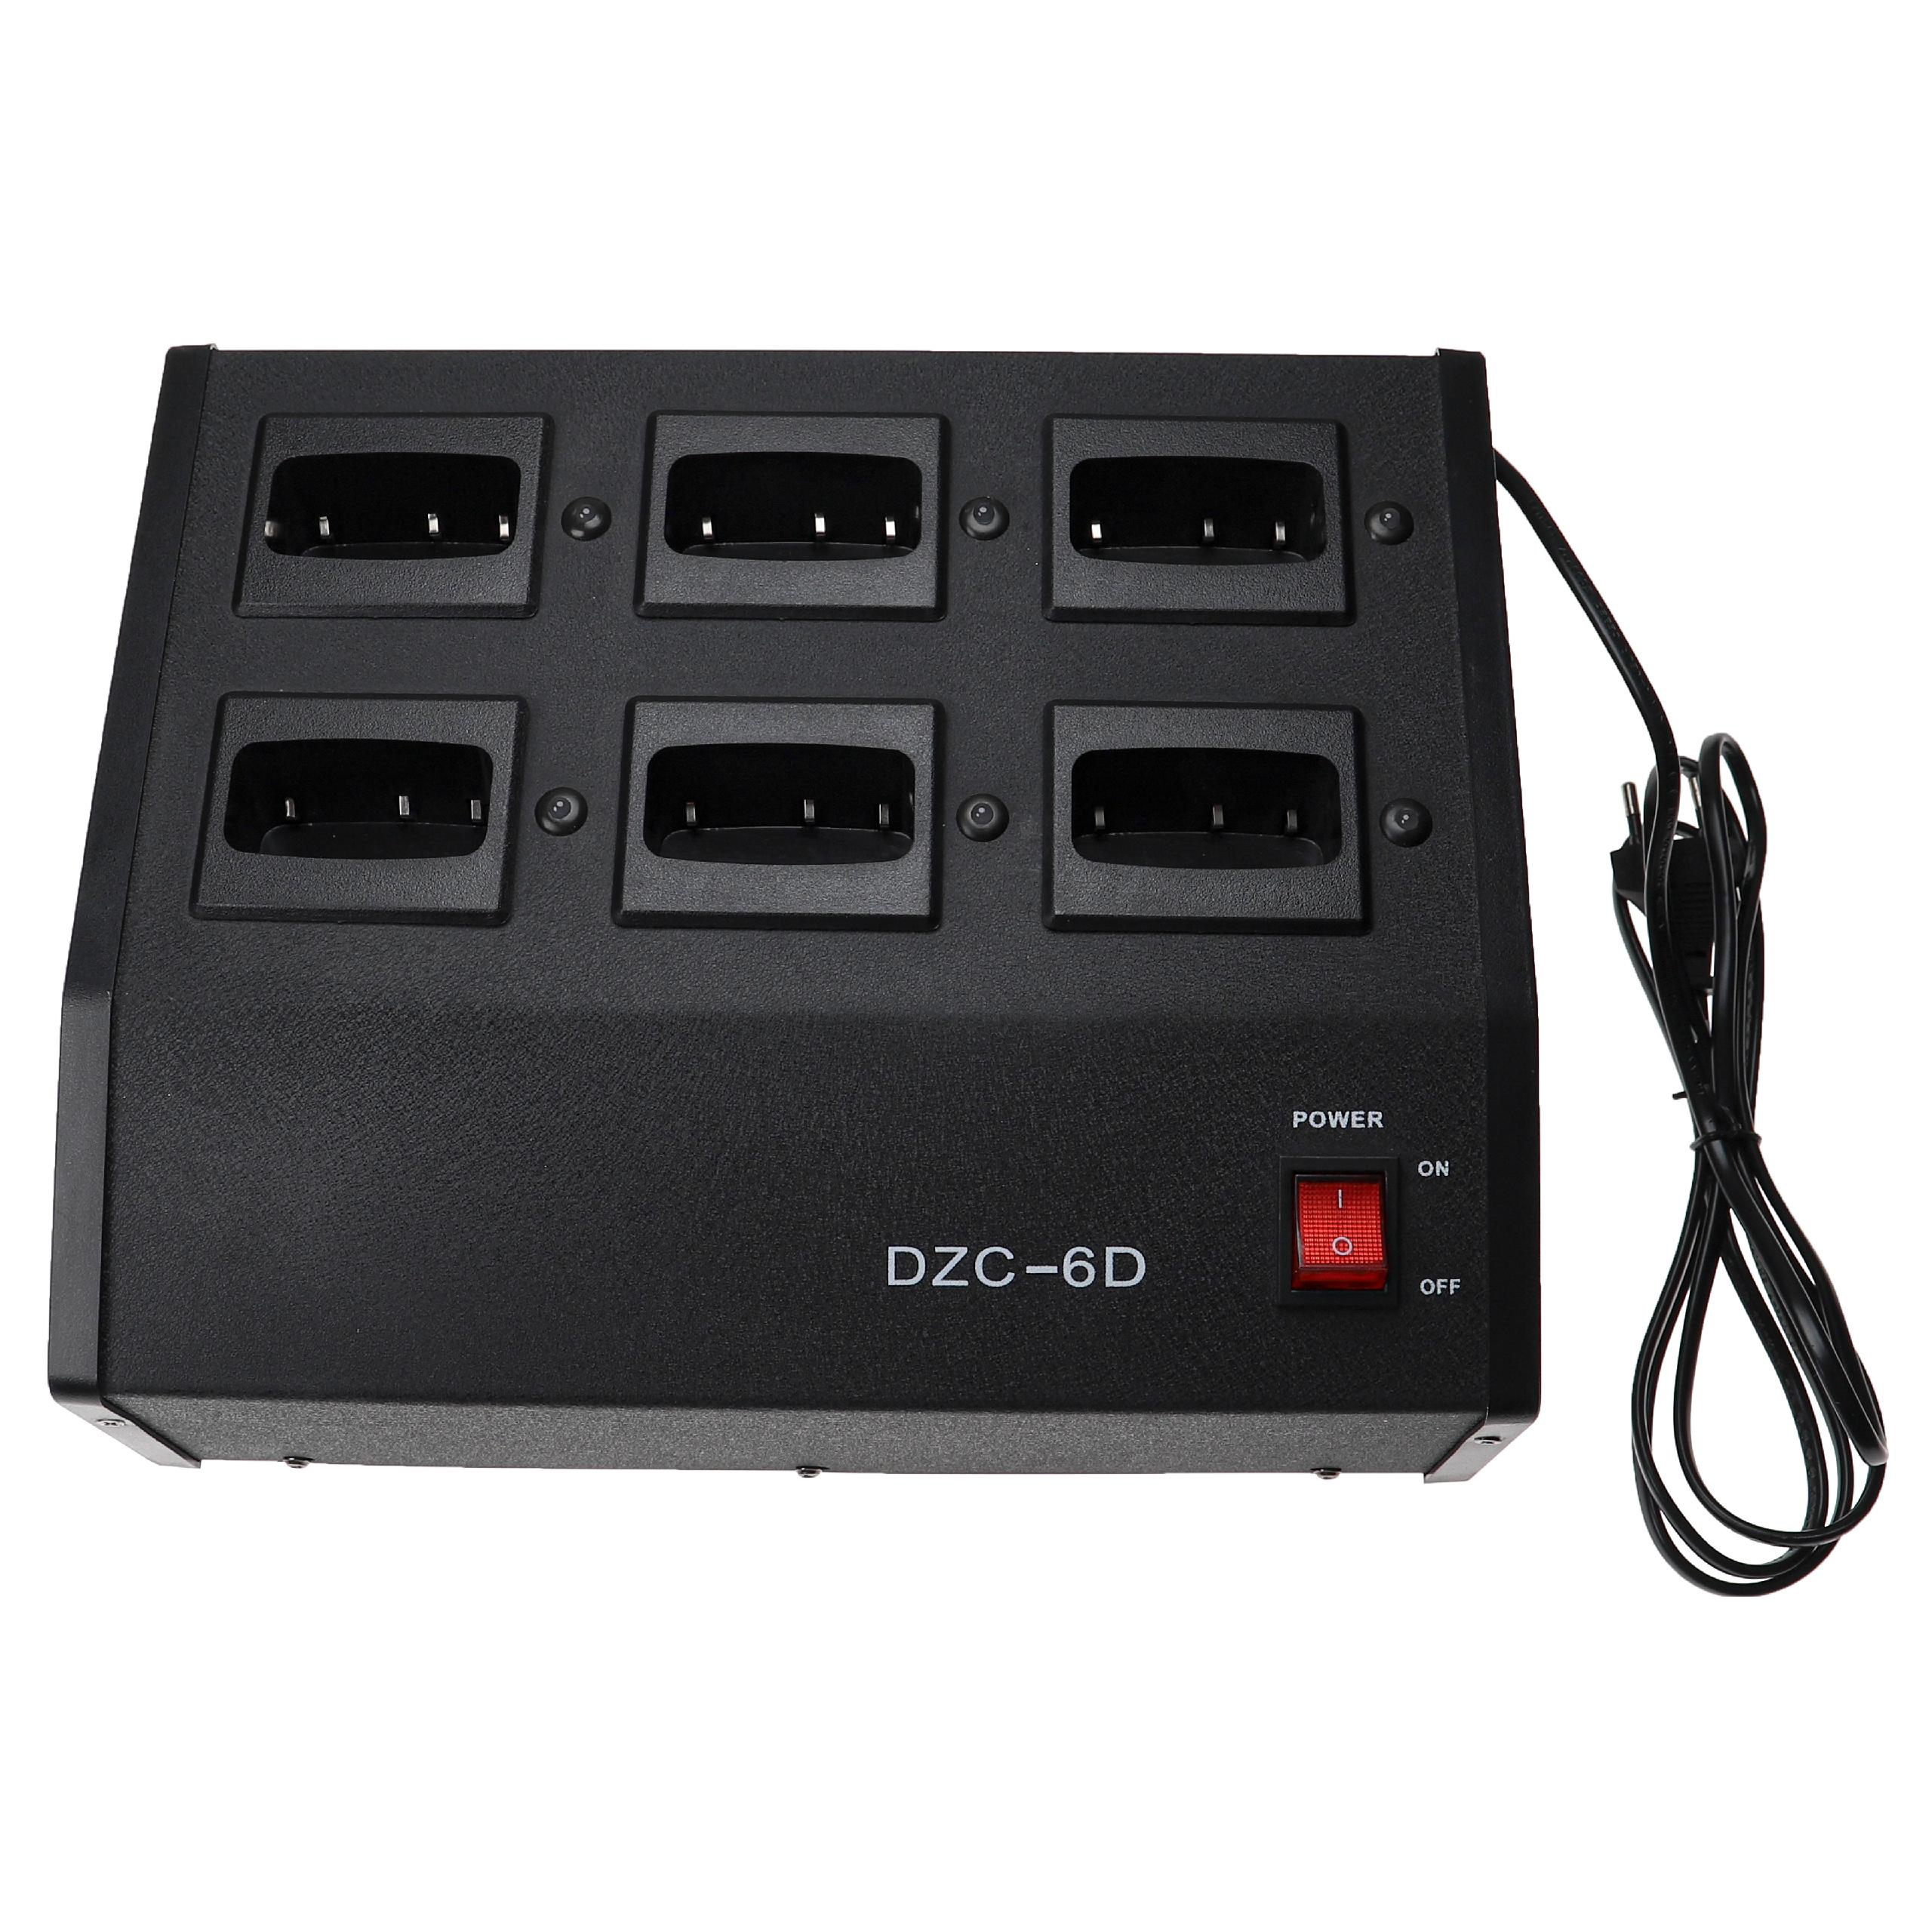 Charger Suitable for Midland 73-30 Radio Batteries - 15 V, 7 A